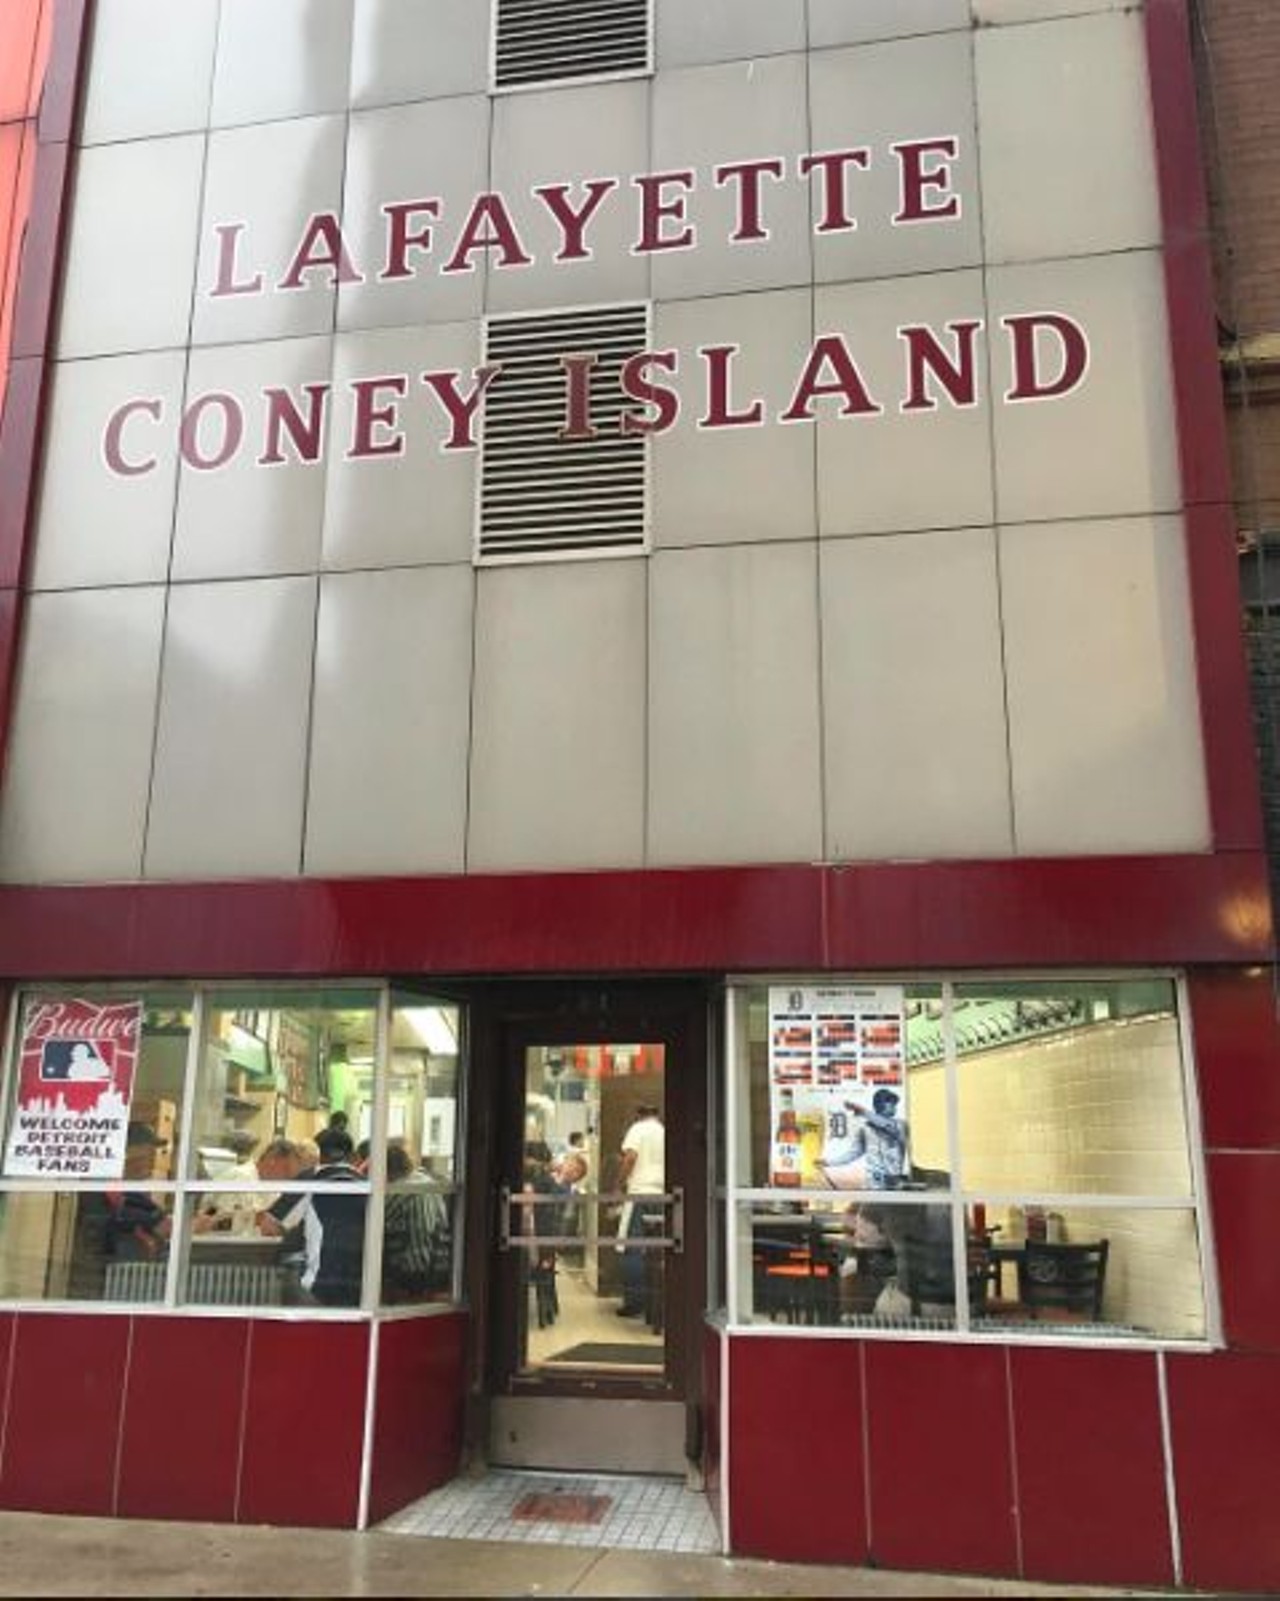 Lafayette Coney Island
118 W Lafayette Blvd, Detroit; 313-964-8198
Lafayette, American&#146;s arch nemesis situated right next door, has also had it&#146;s doors open for 100 long years making it a staple in Detroit cuisine. Just like American, they&#146;re  serving the original and premier coney dog but theirs is topped Spanish onions and a beefier chili. You can&#146;t go wrong with this cheap and atmospheric diner.
Photo via IG user @yourstrulyjordan92